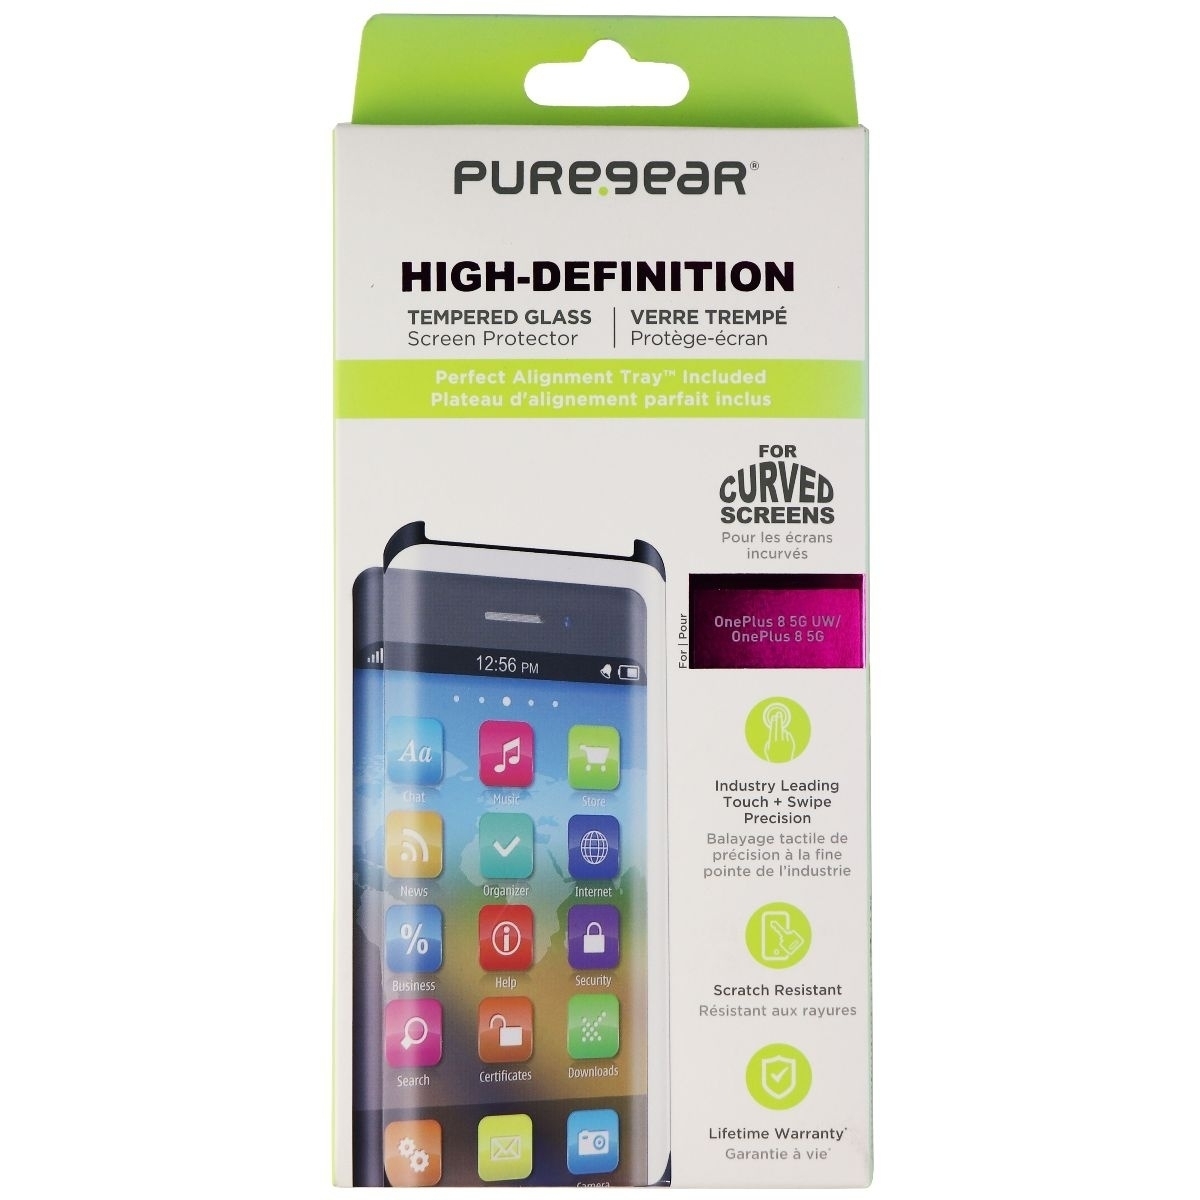 PureGear High Definition Screen Protector For OnePlus 8 5G UW & 8 5G - Clear